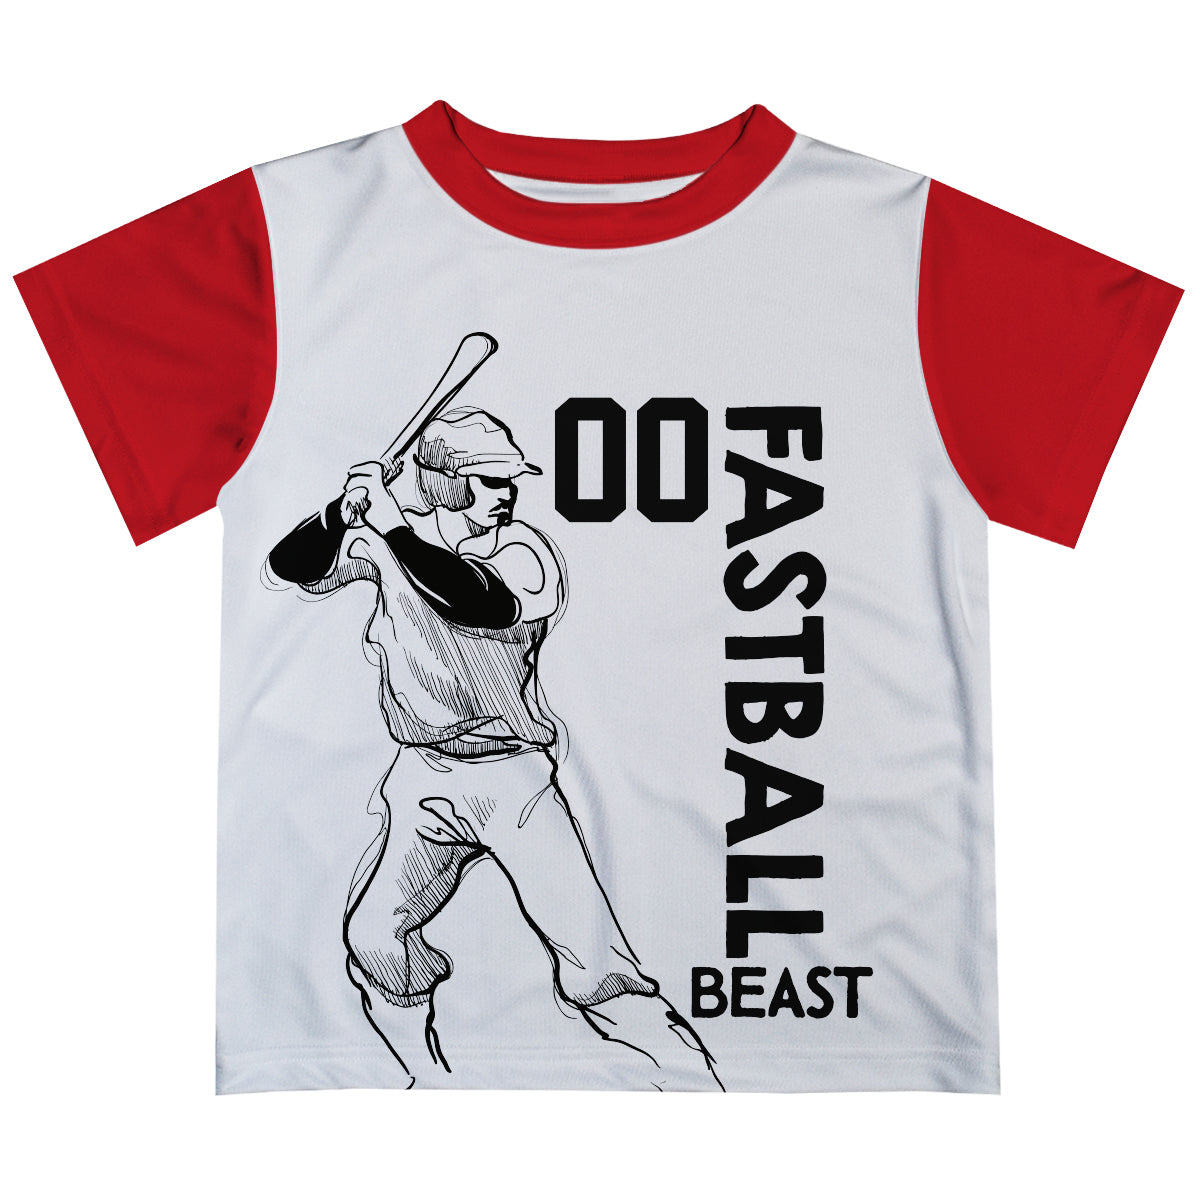 Baseball Player Number White and Red Short Sleeve Tee Shirt